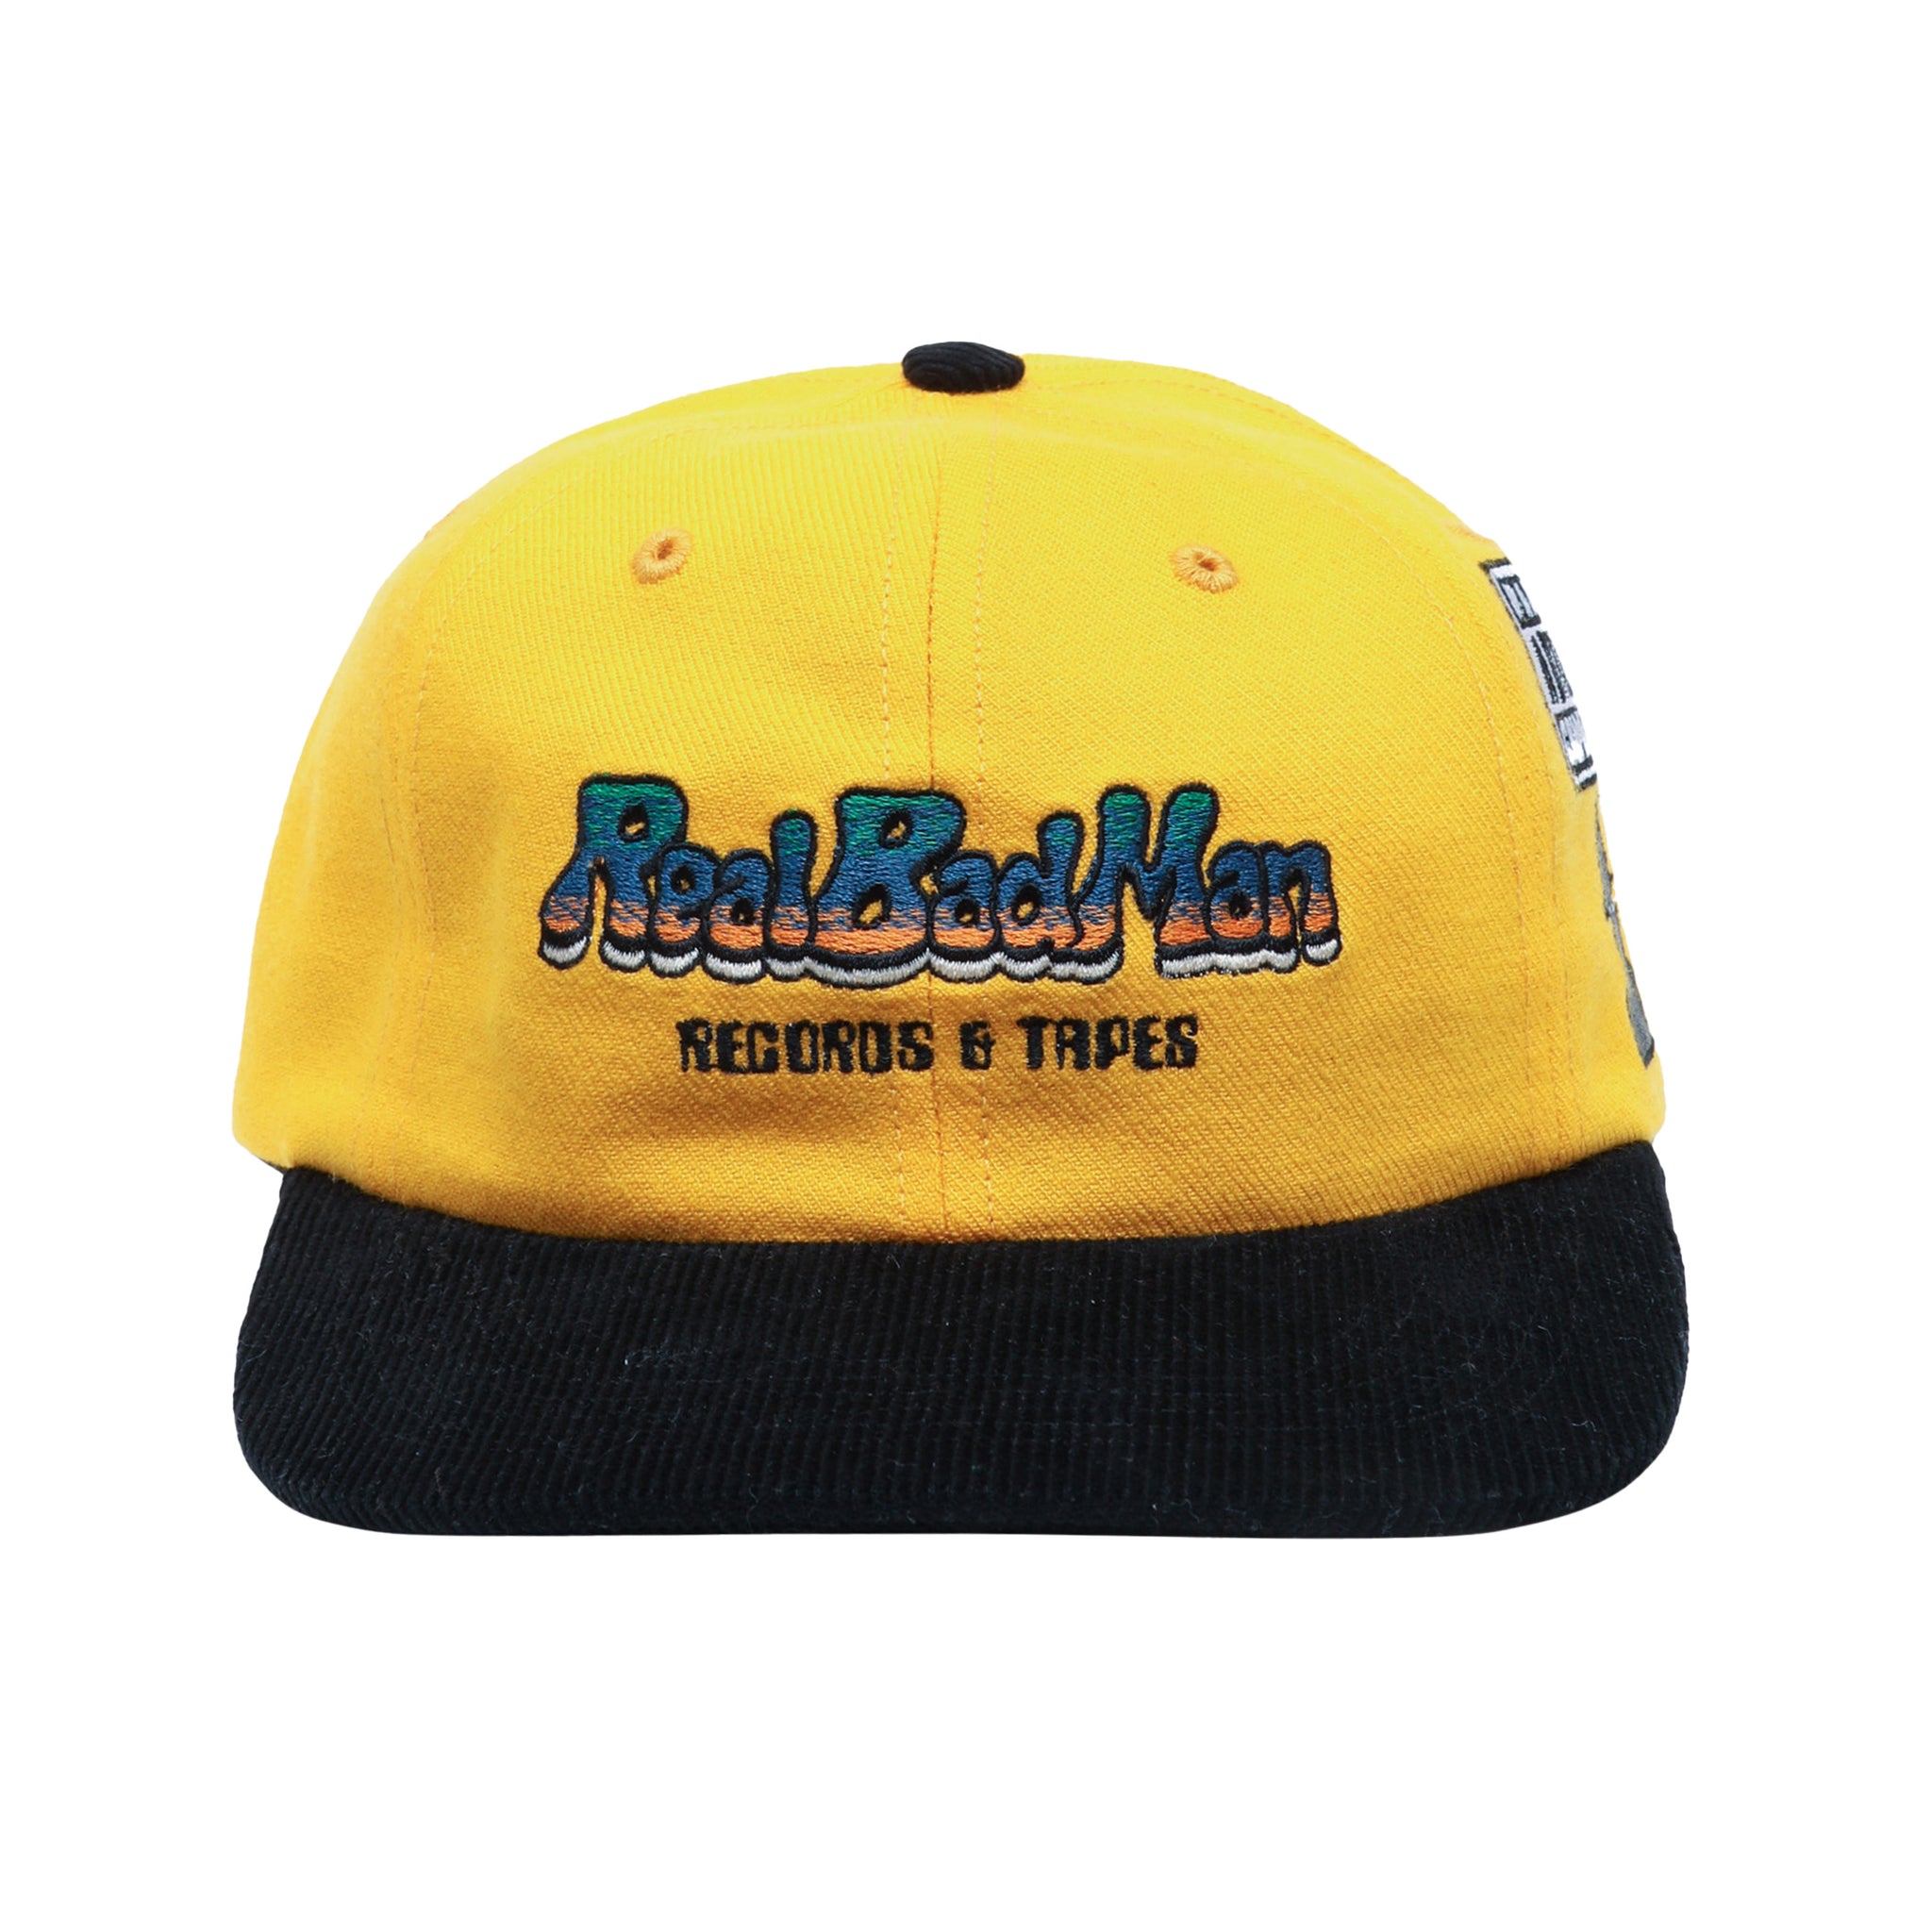 Records & Tapes Hat